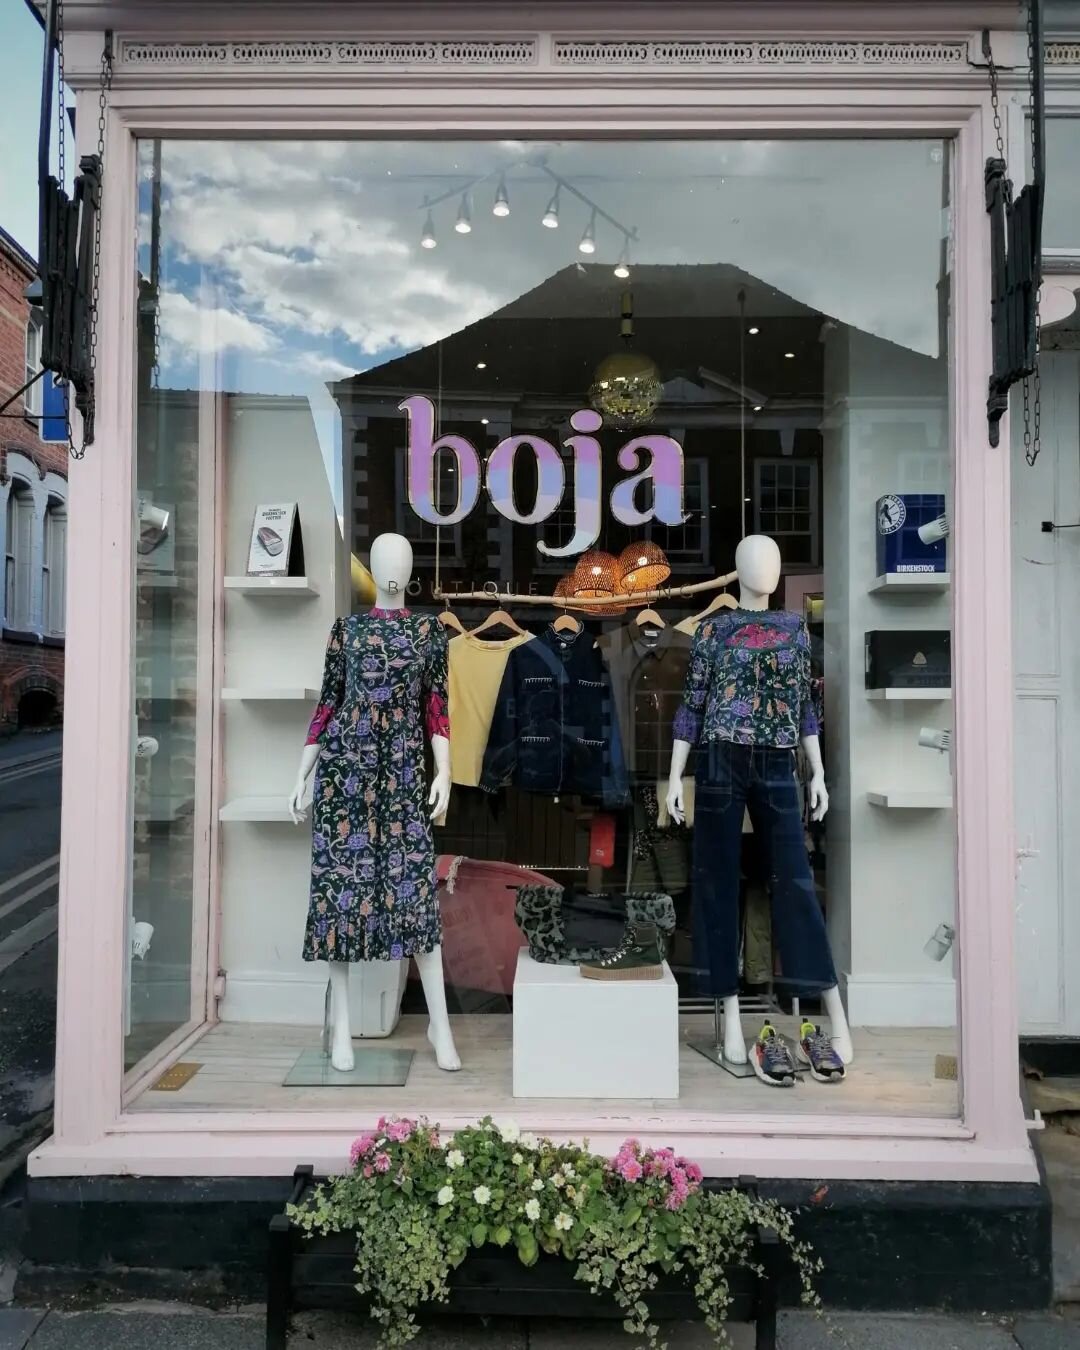 Spent the day in Tarporley over the road from @bojaboutique which is still looking fresh 2 years on.

It's the first time I've seen the shop finished and the windows clear of cif. Looks great.